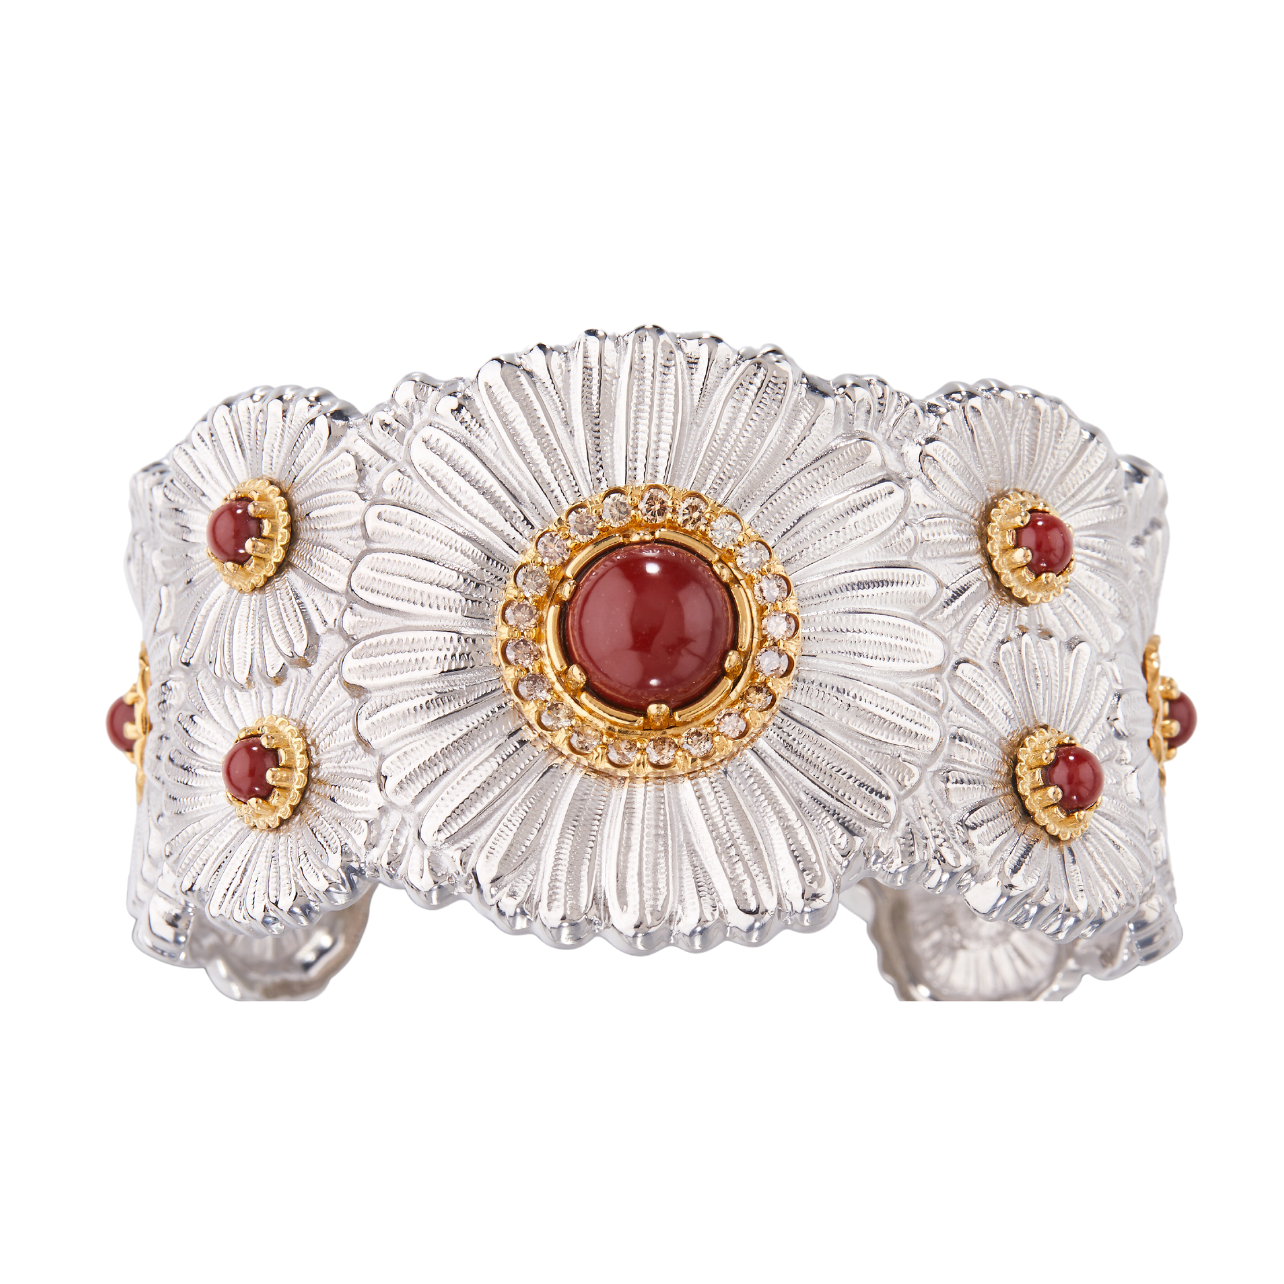 Buccellati Blossoms collection bracelet with palladium and gold-plated sterling silver with red jasper